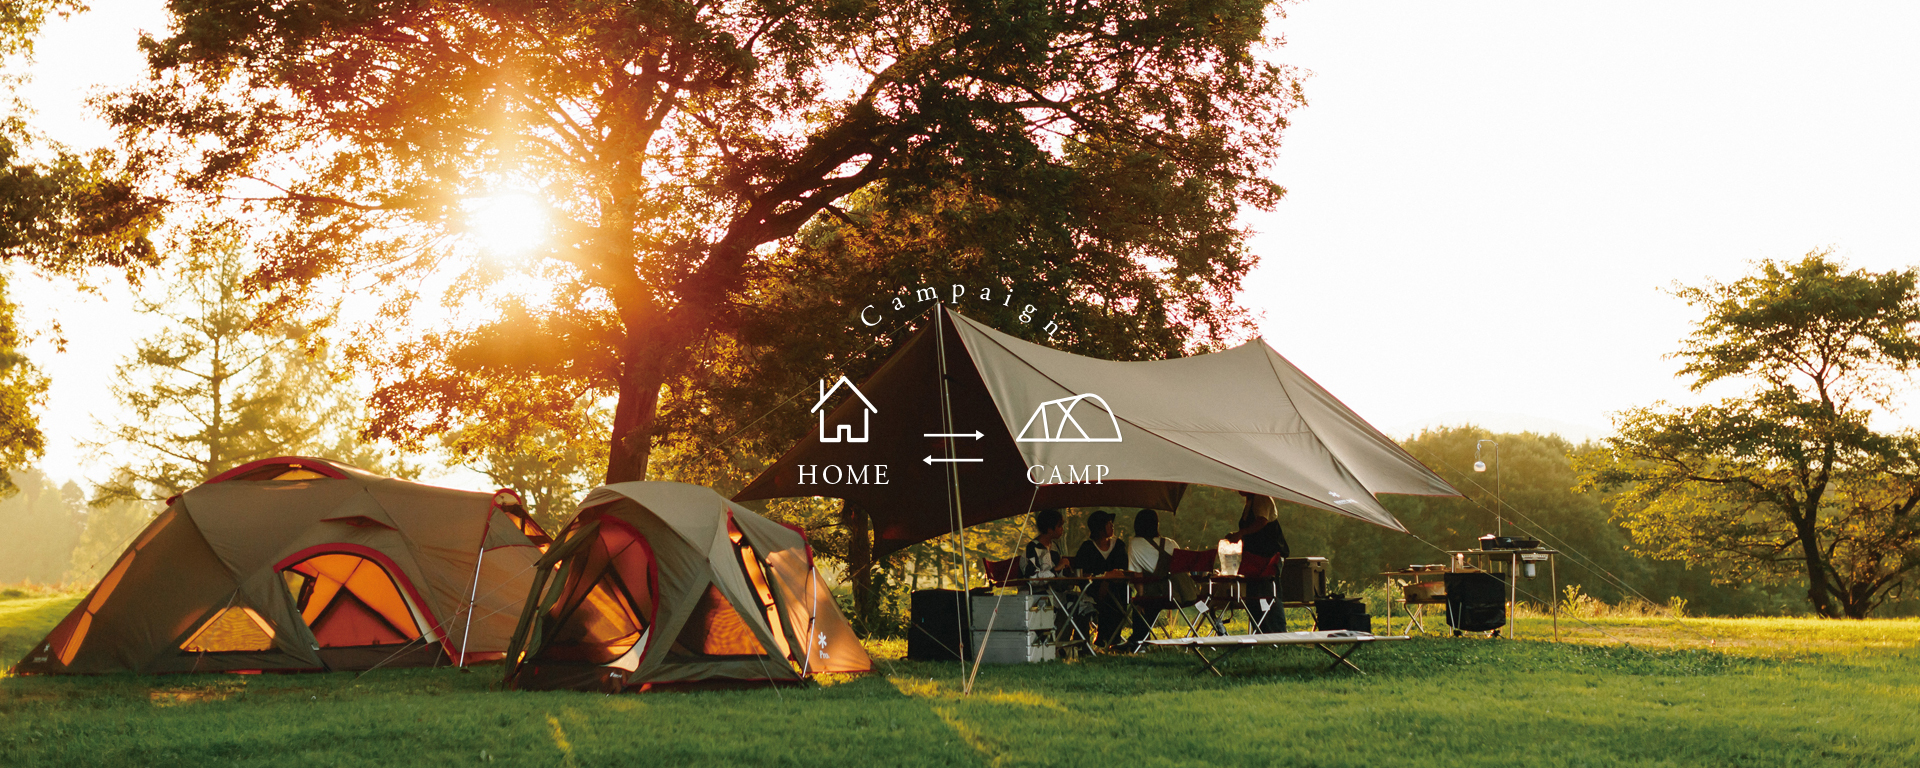 HOME & CAMP Campaign